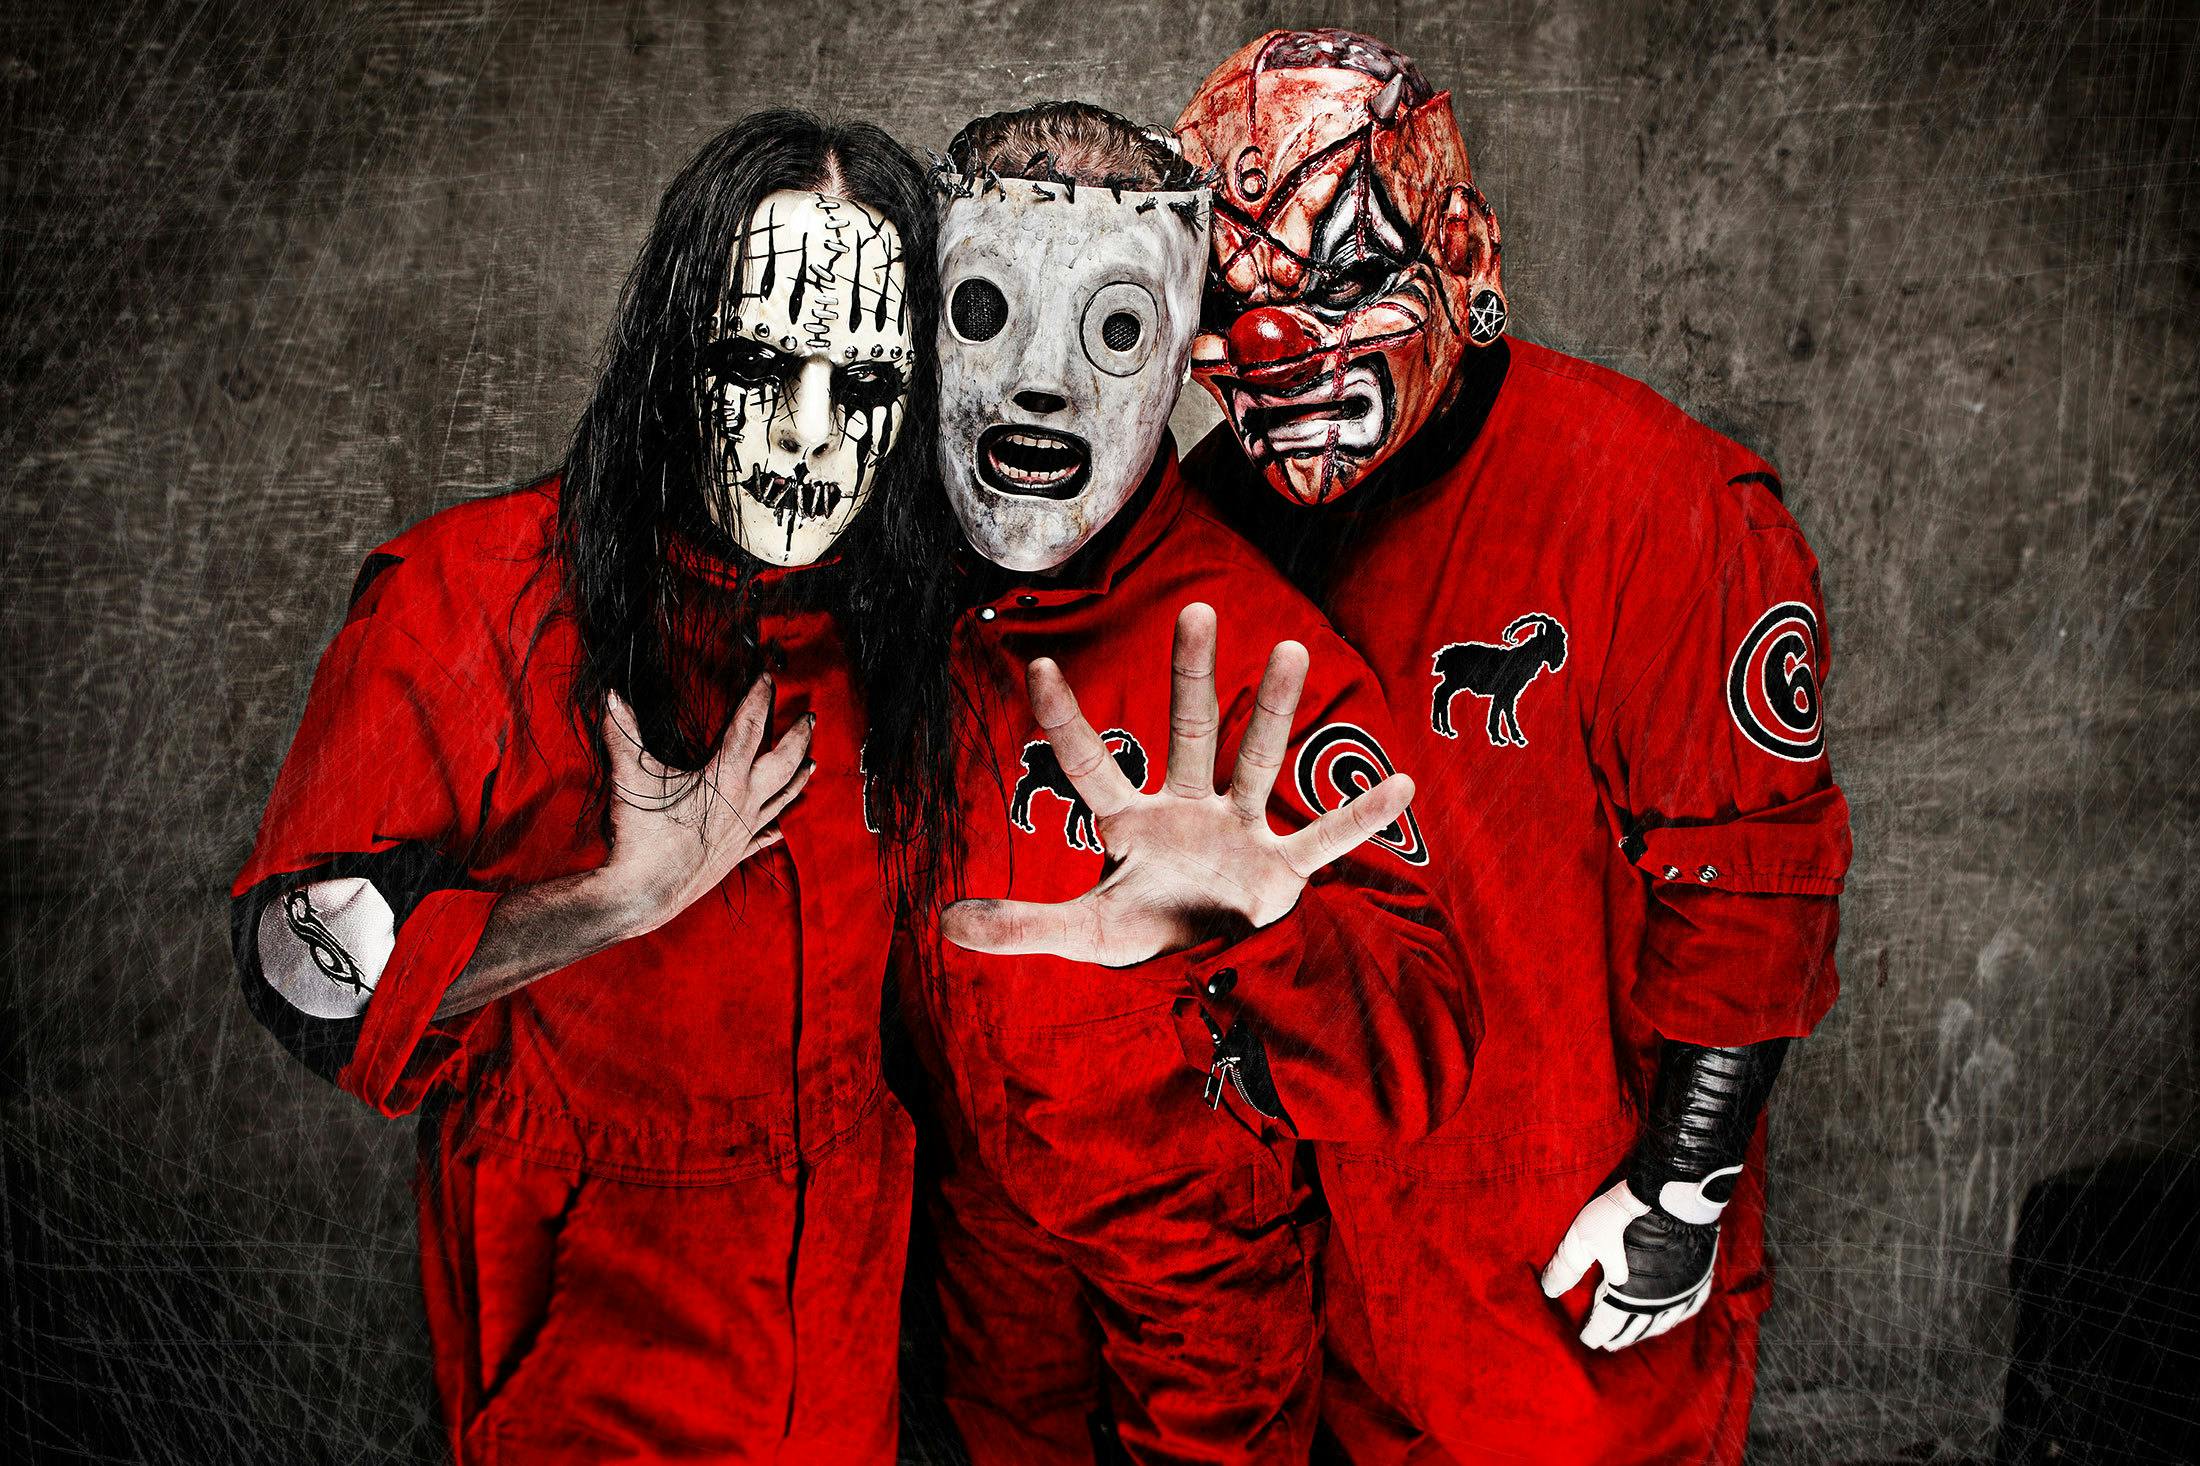 Corey Taylor on Joey Jordison: "He was one of the true musical geniuses I’d ever met, he was just complicated"